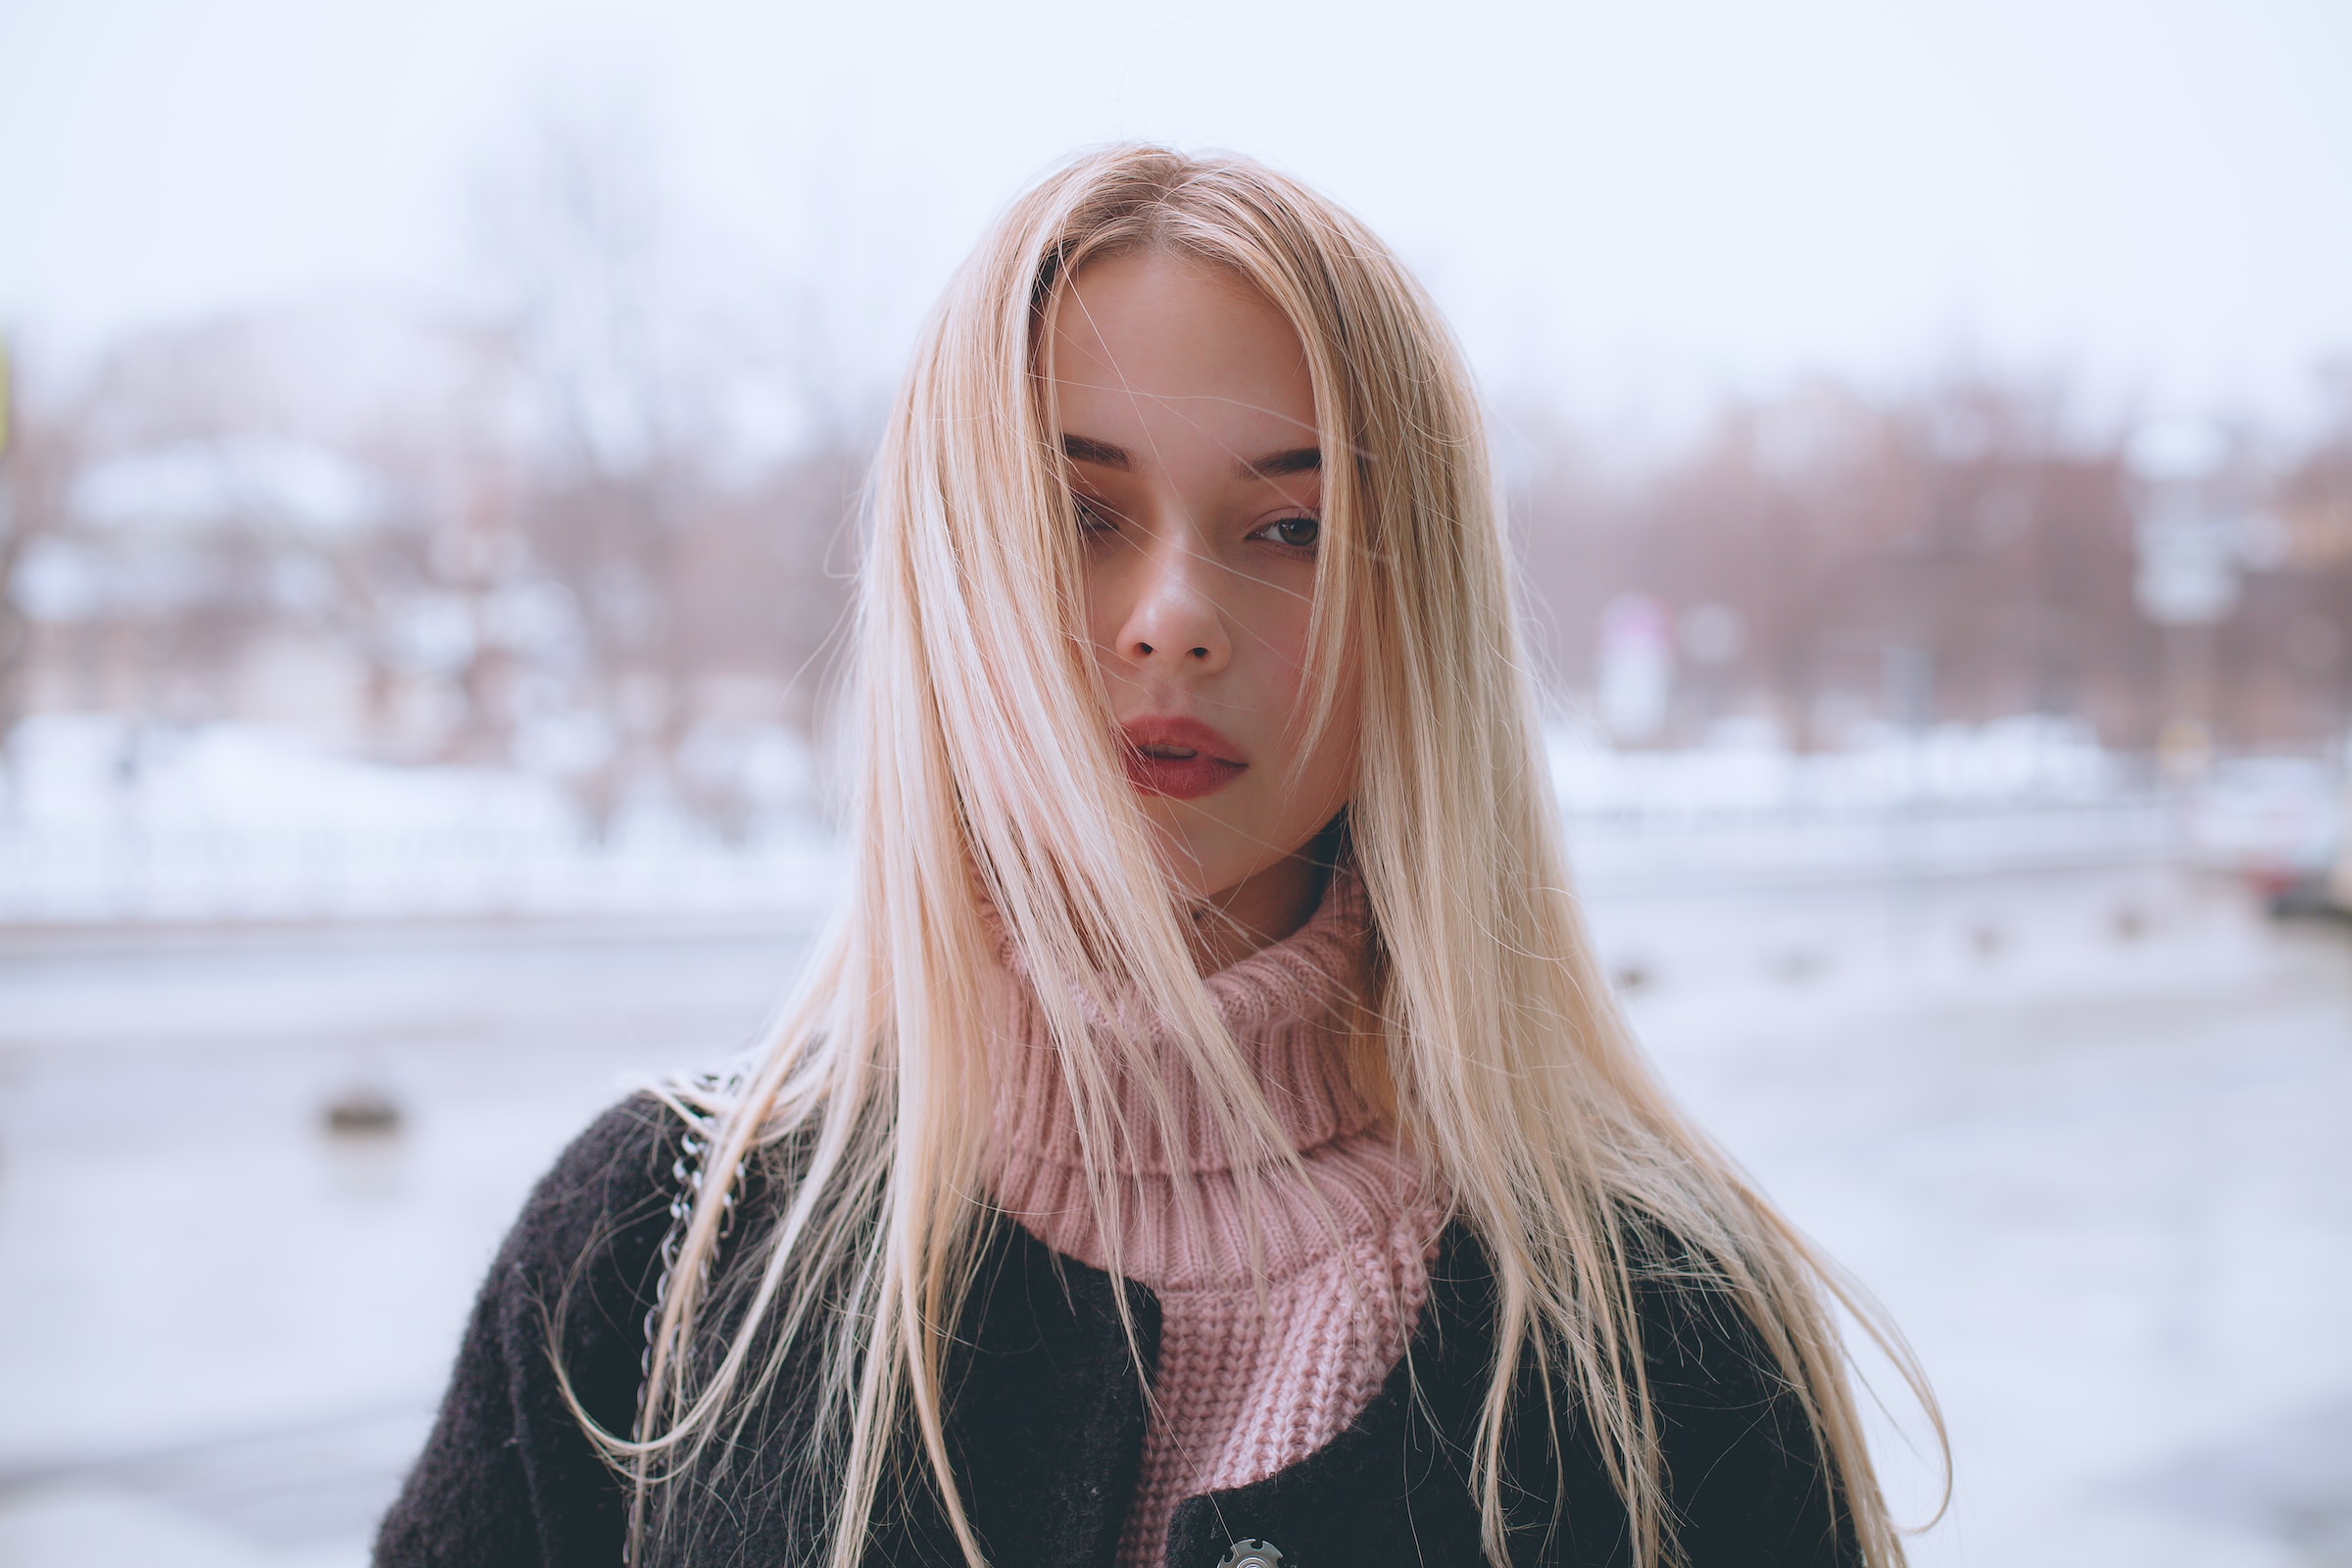 Blond thoughtful woman in the snow. | Source: Unsplash